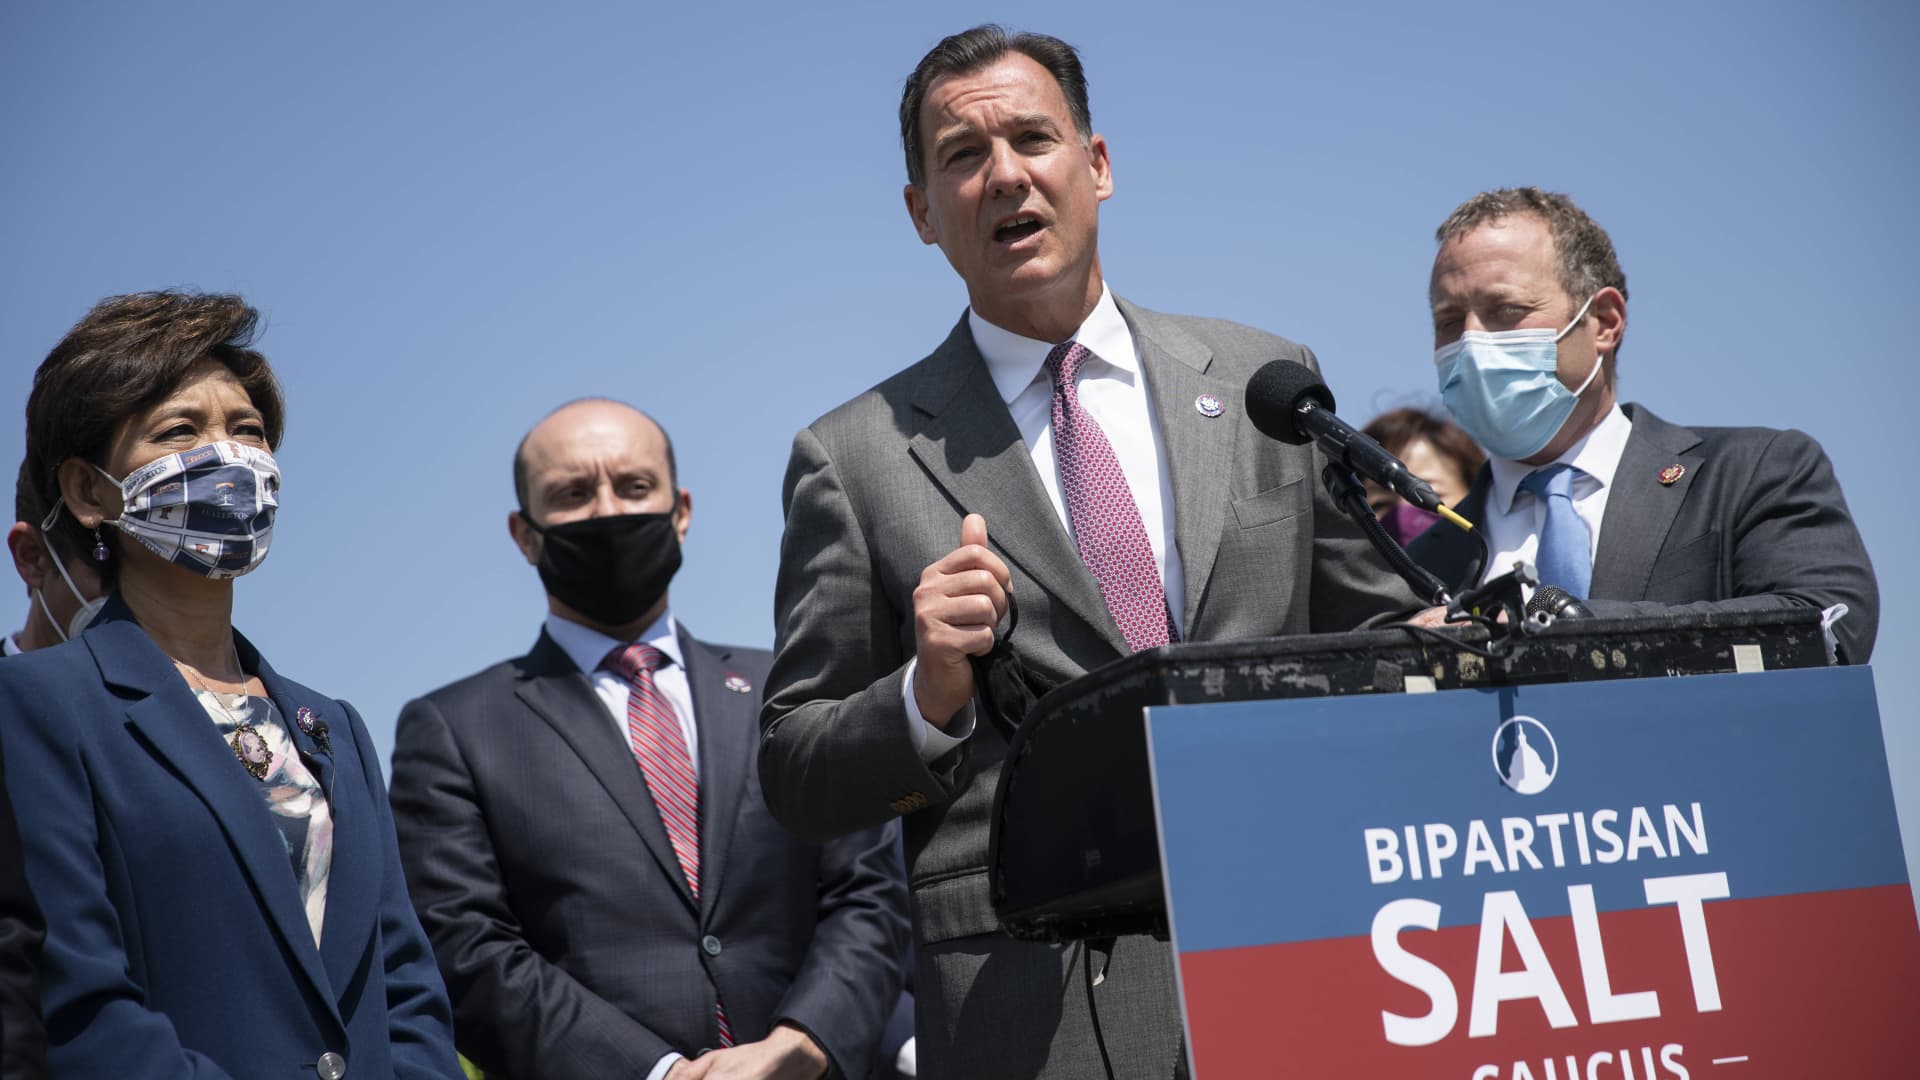 Representative Tom Suozzi, a Democrat from New York, speaks during a news conference announcing the State and Local Taxes (SALT) Caucus outside the U.S. Capitol in Washington, D.C., on Thursday, April 15, 2021.